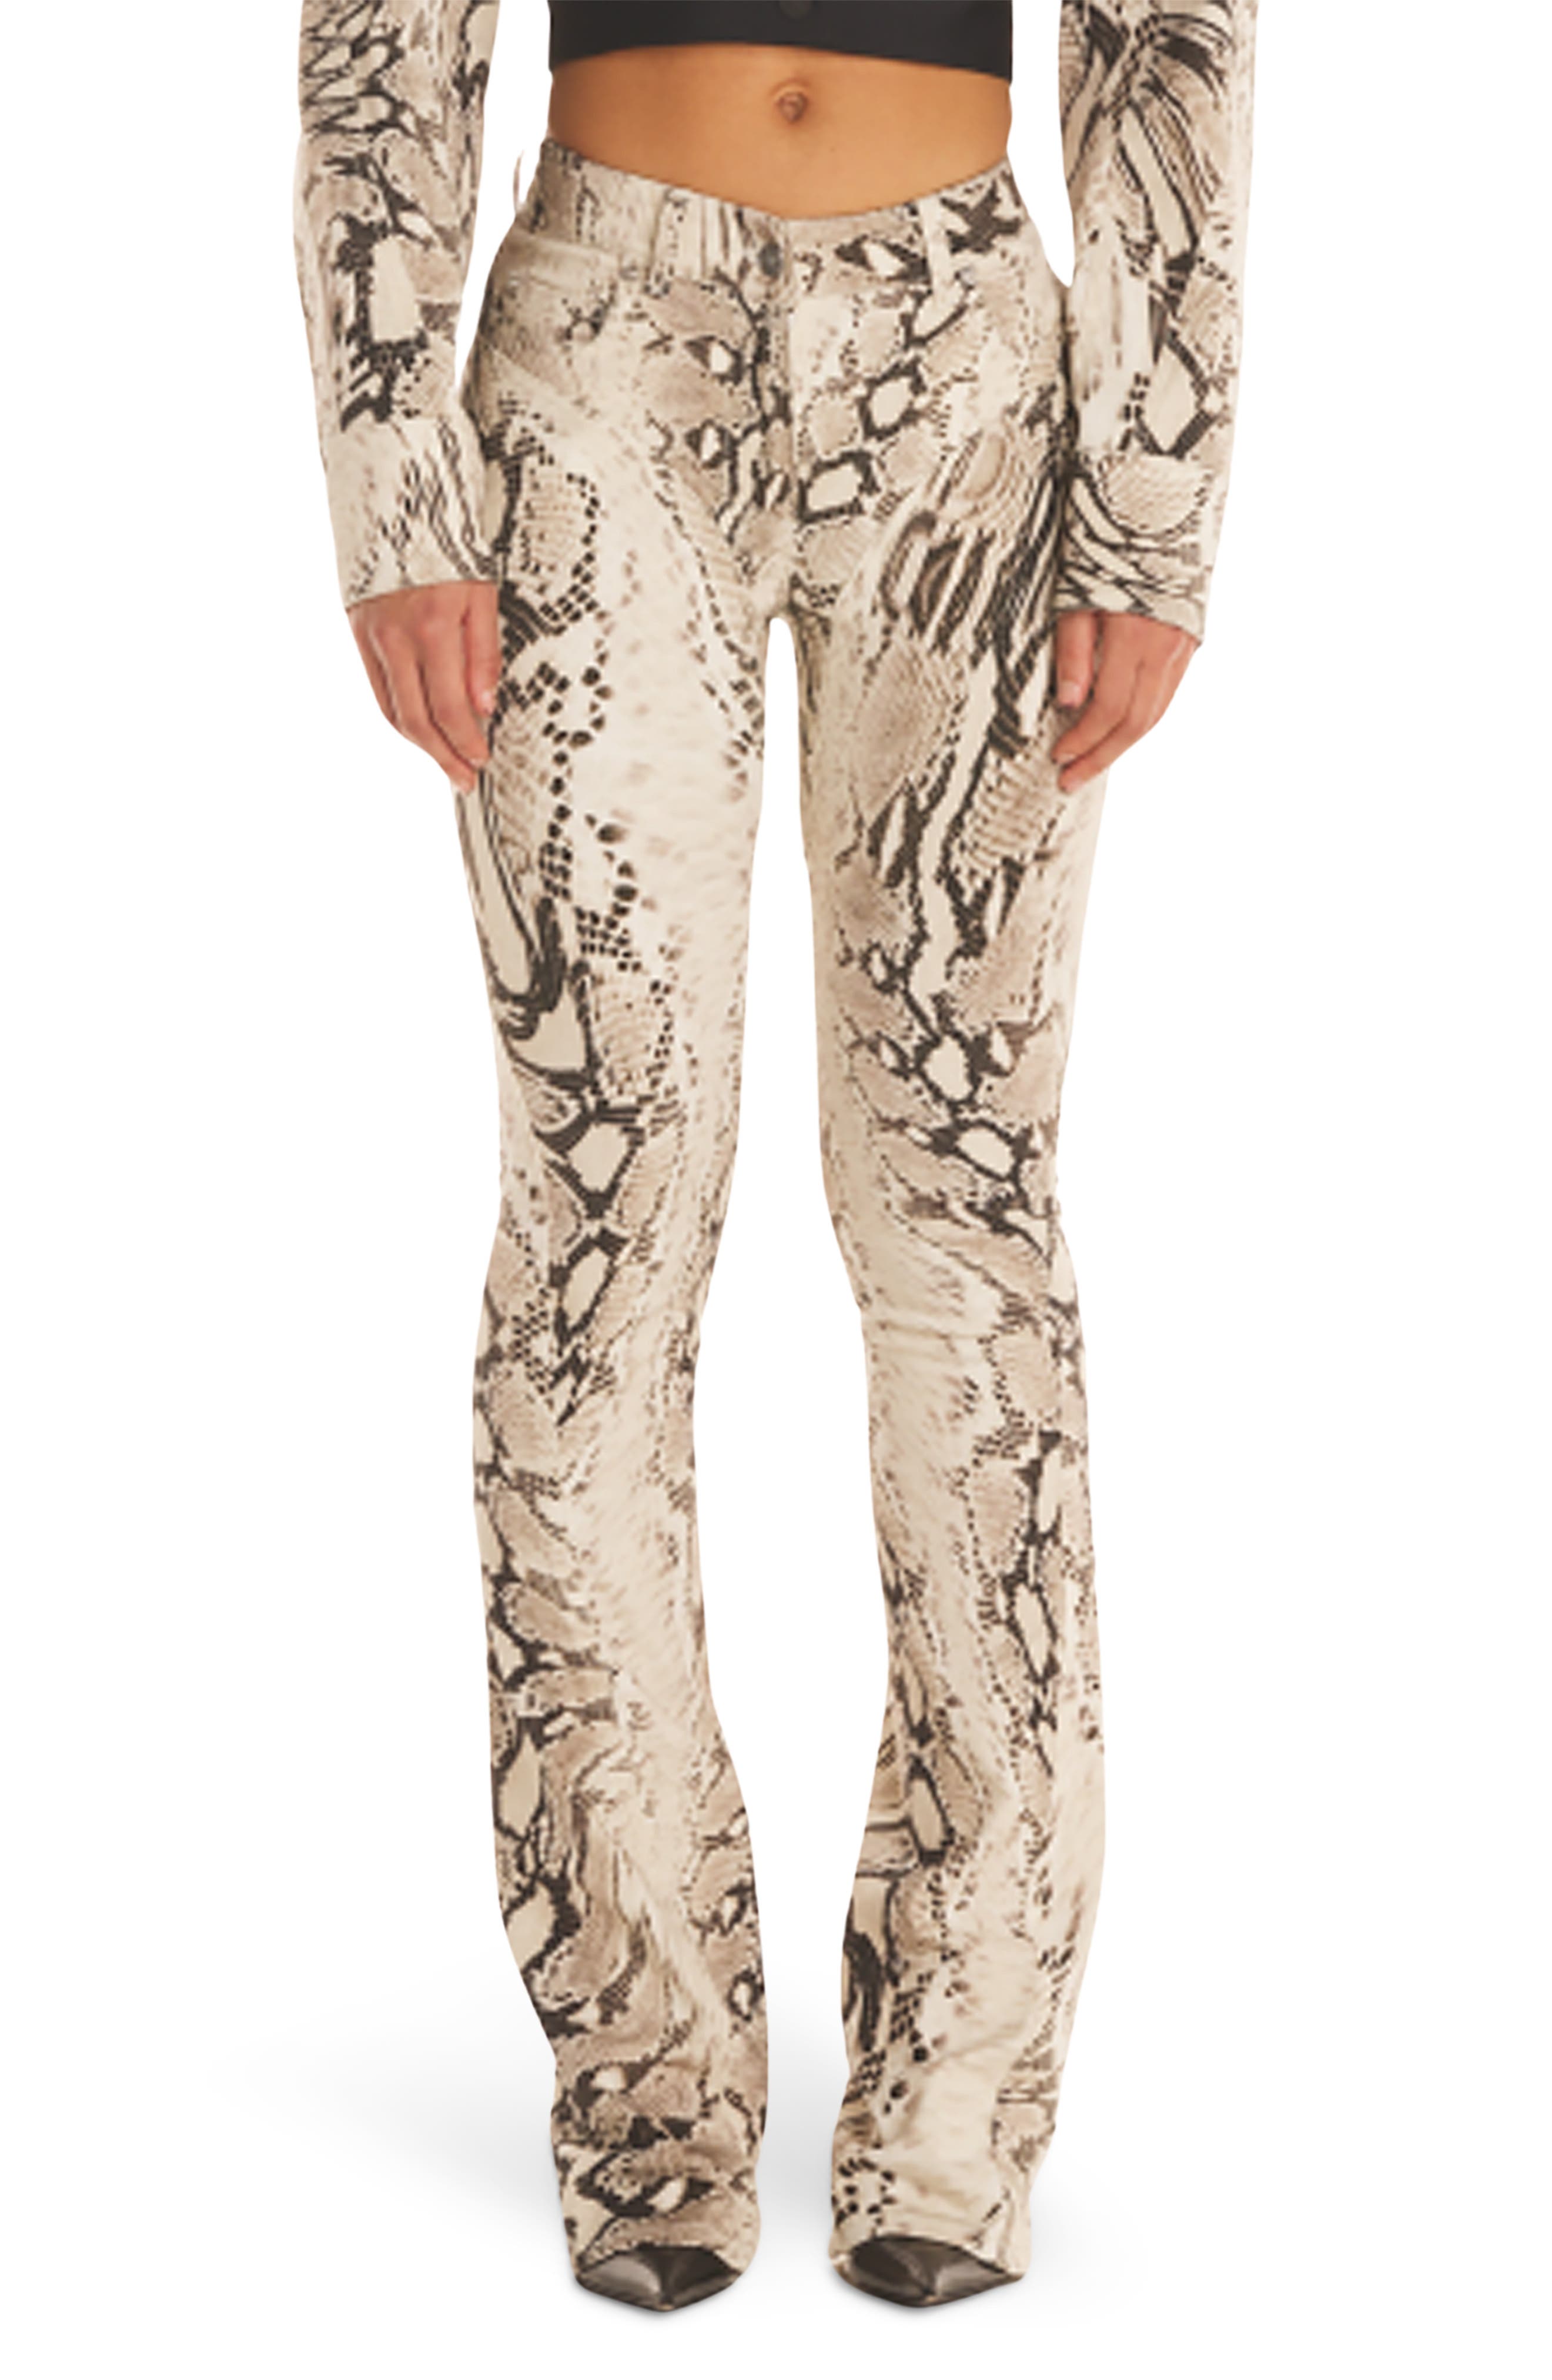 Balenciaga snakeskin-print leather trousers - Red